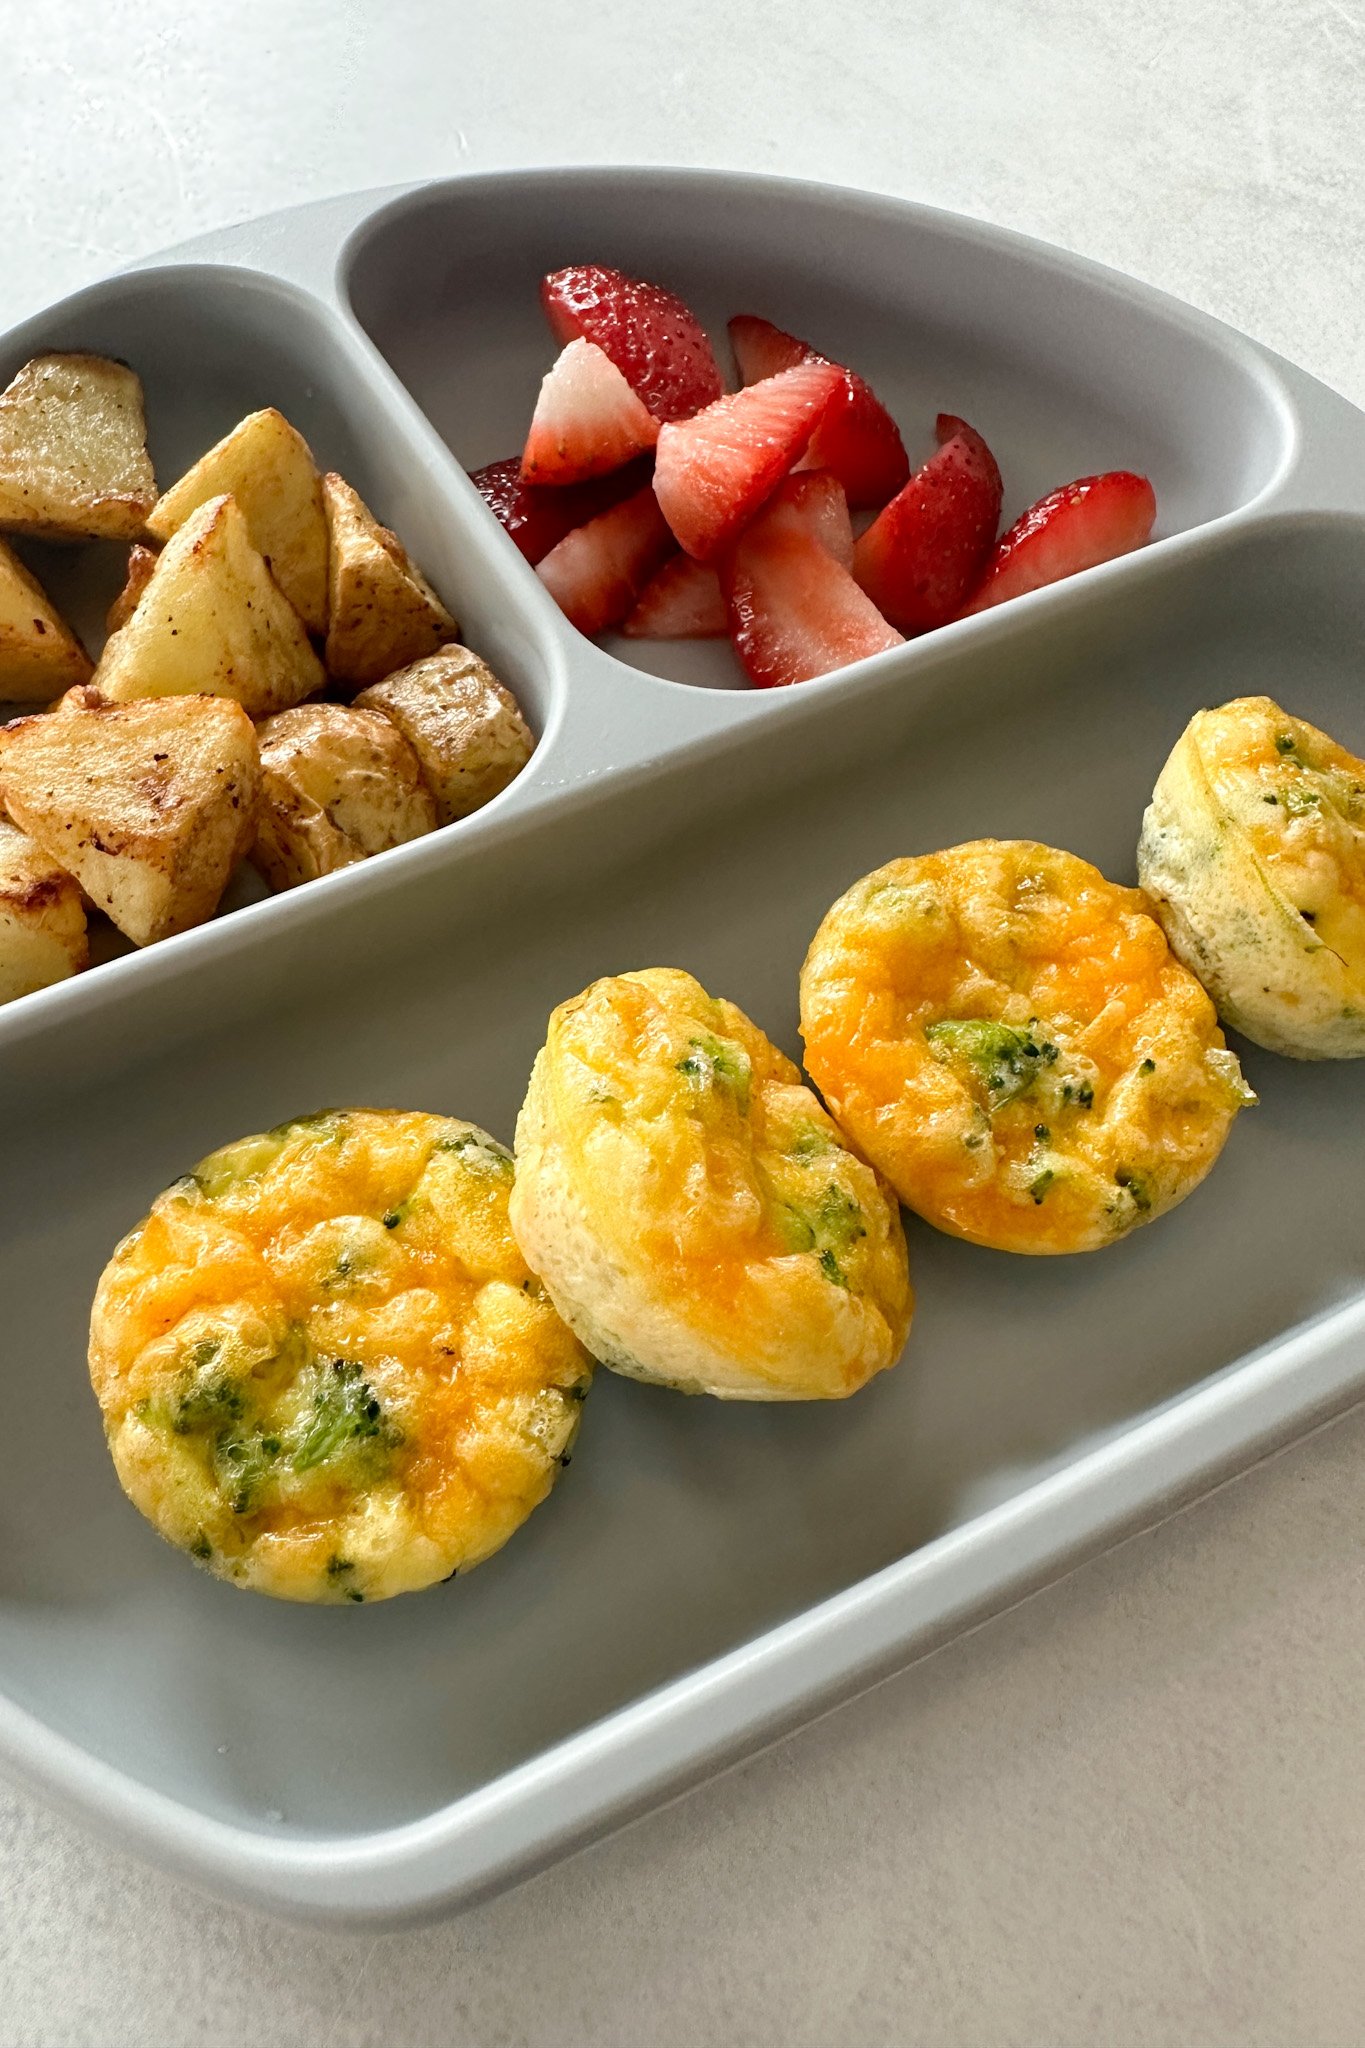 Broccoli egg bites served with fruits and potatoes.